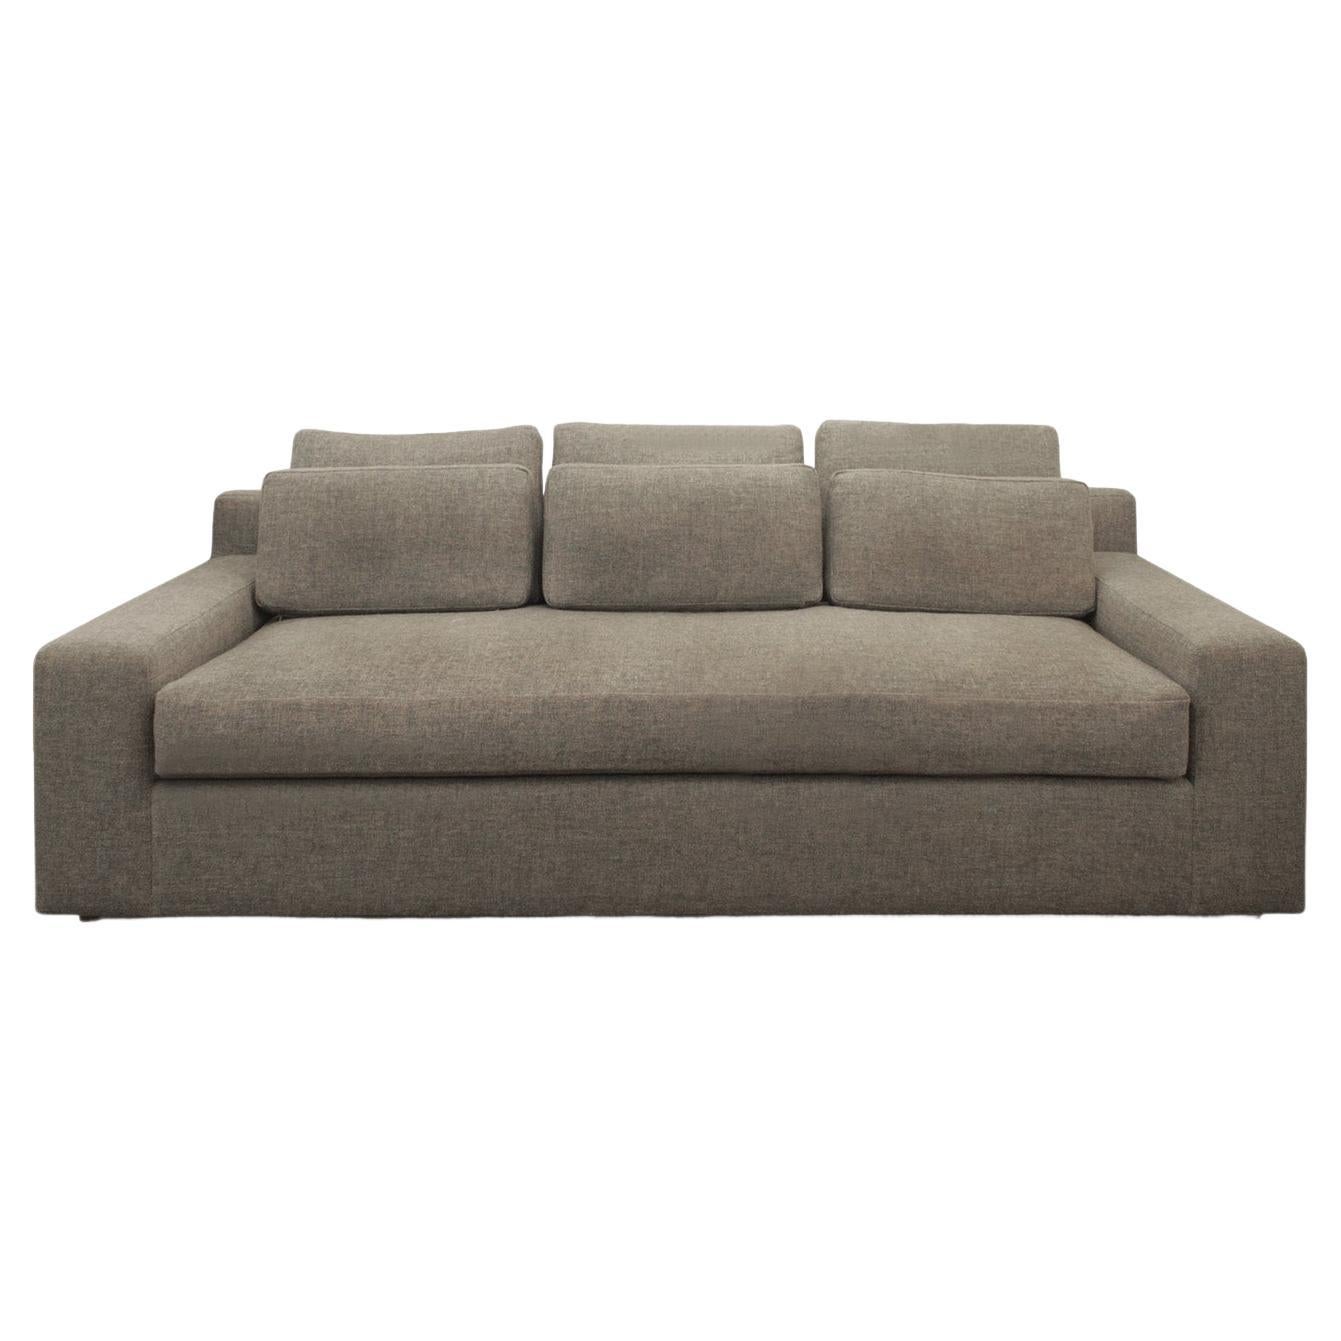 Venfield Modern Sofa /Daybed